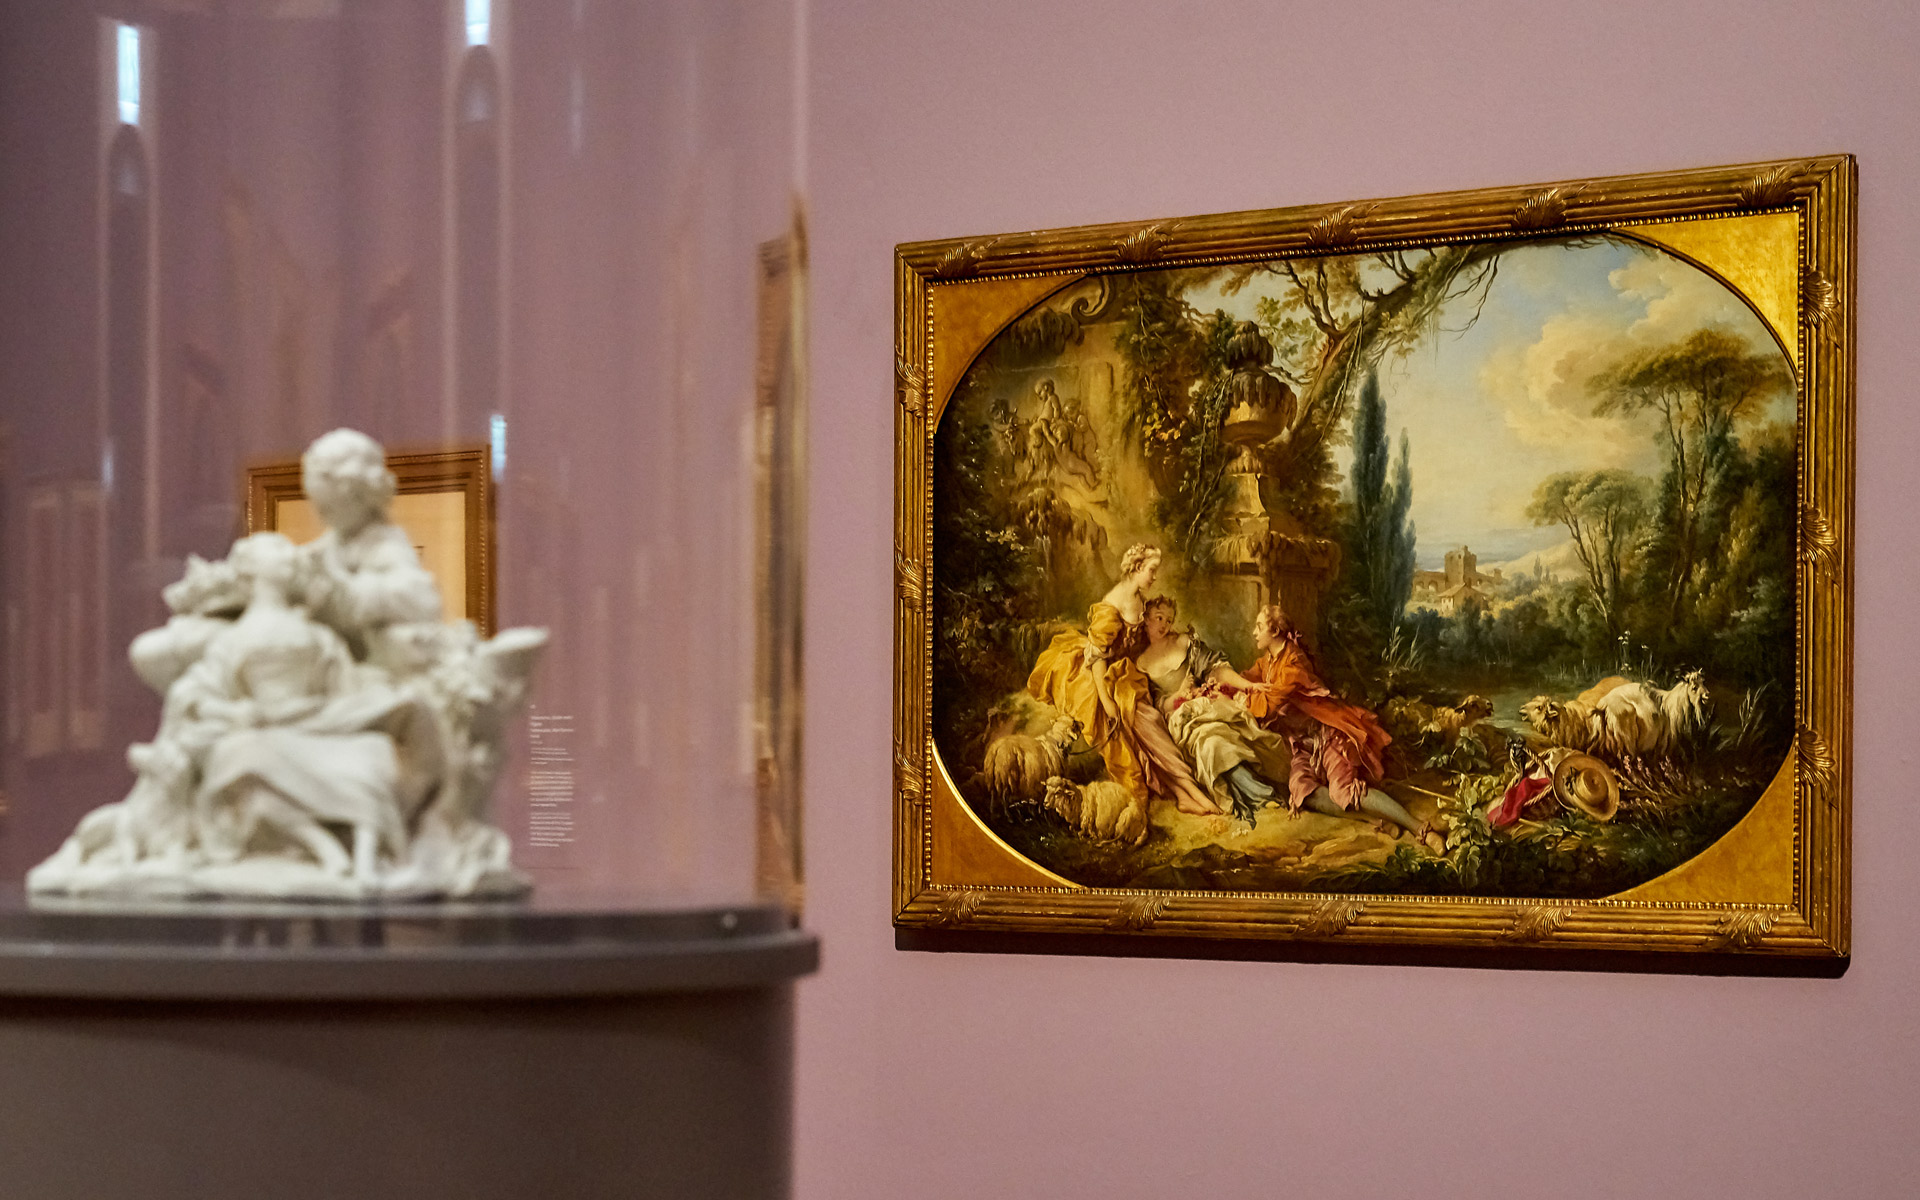 The painting The Magic of Rural Life in the François Boucher exhibition. The picture shows a resting group of people with grazing cattle. A landscape opens up in the background.